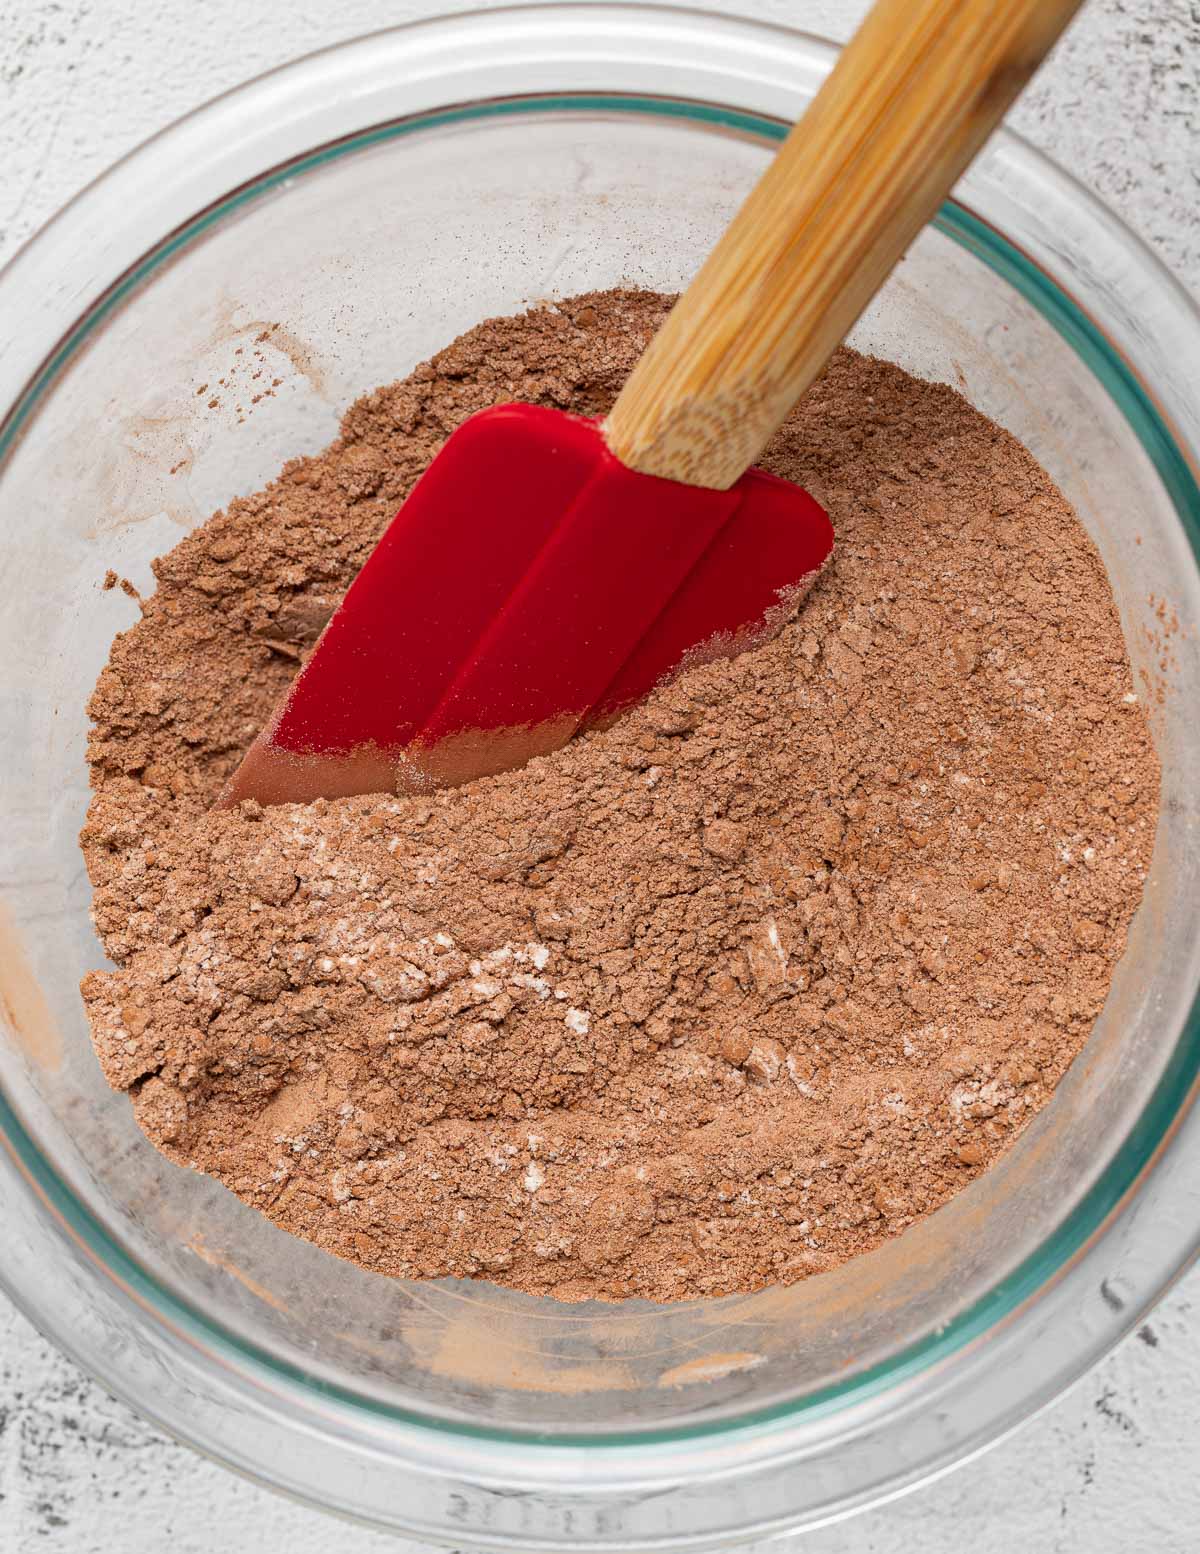 dry chocolate cake ingredients in a bowl